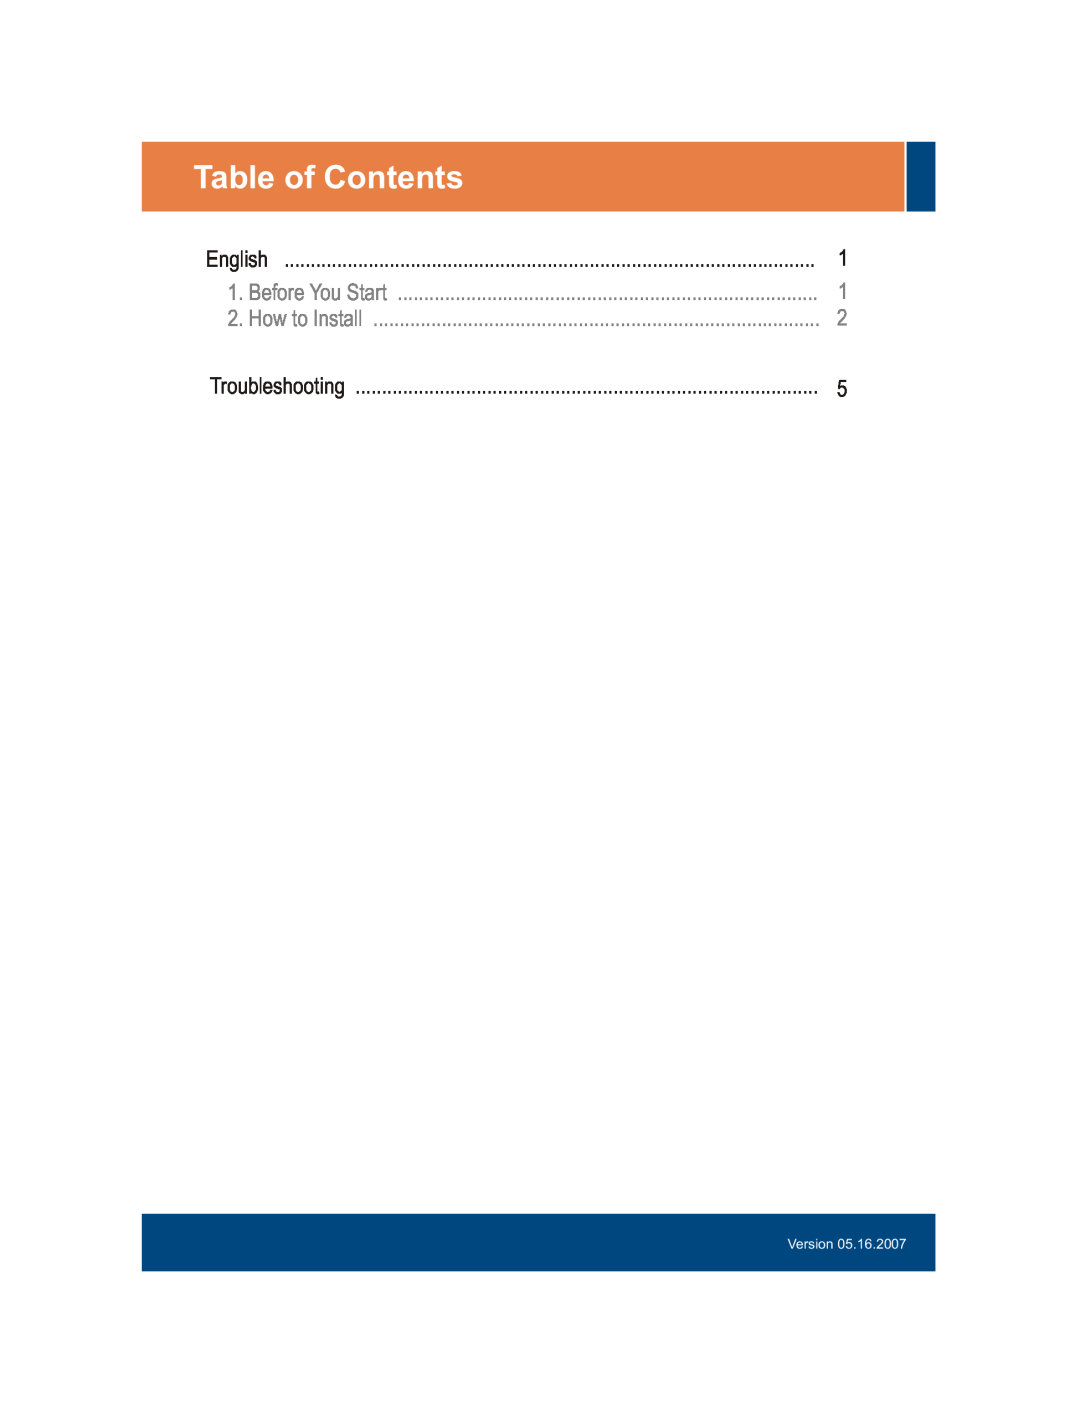 TRENDnet TU-S9 manual Table of Contents, English, Before You Start, How to Install, Version 